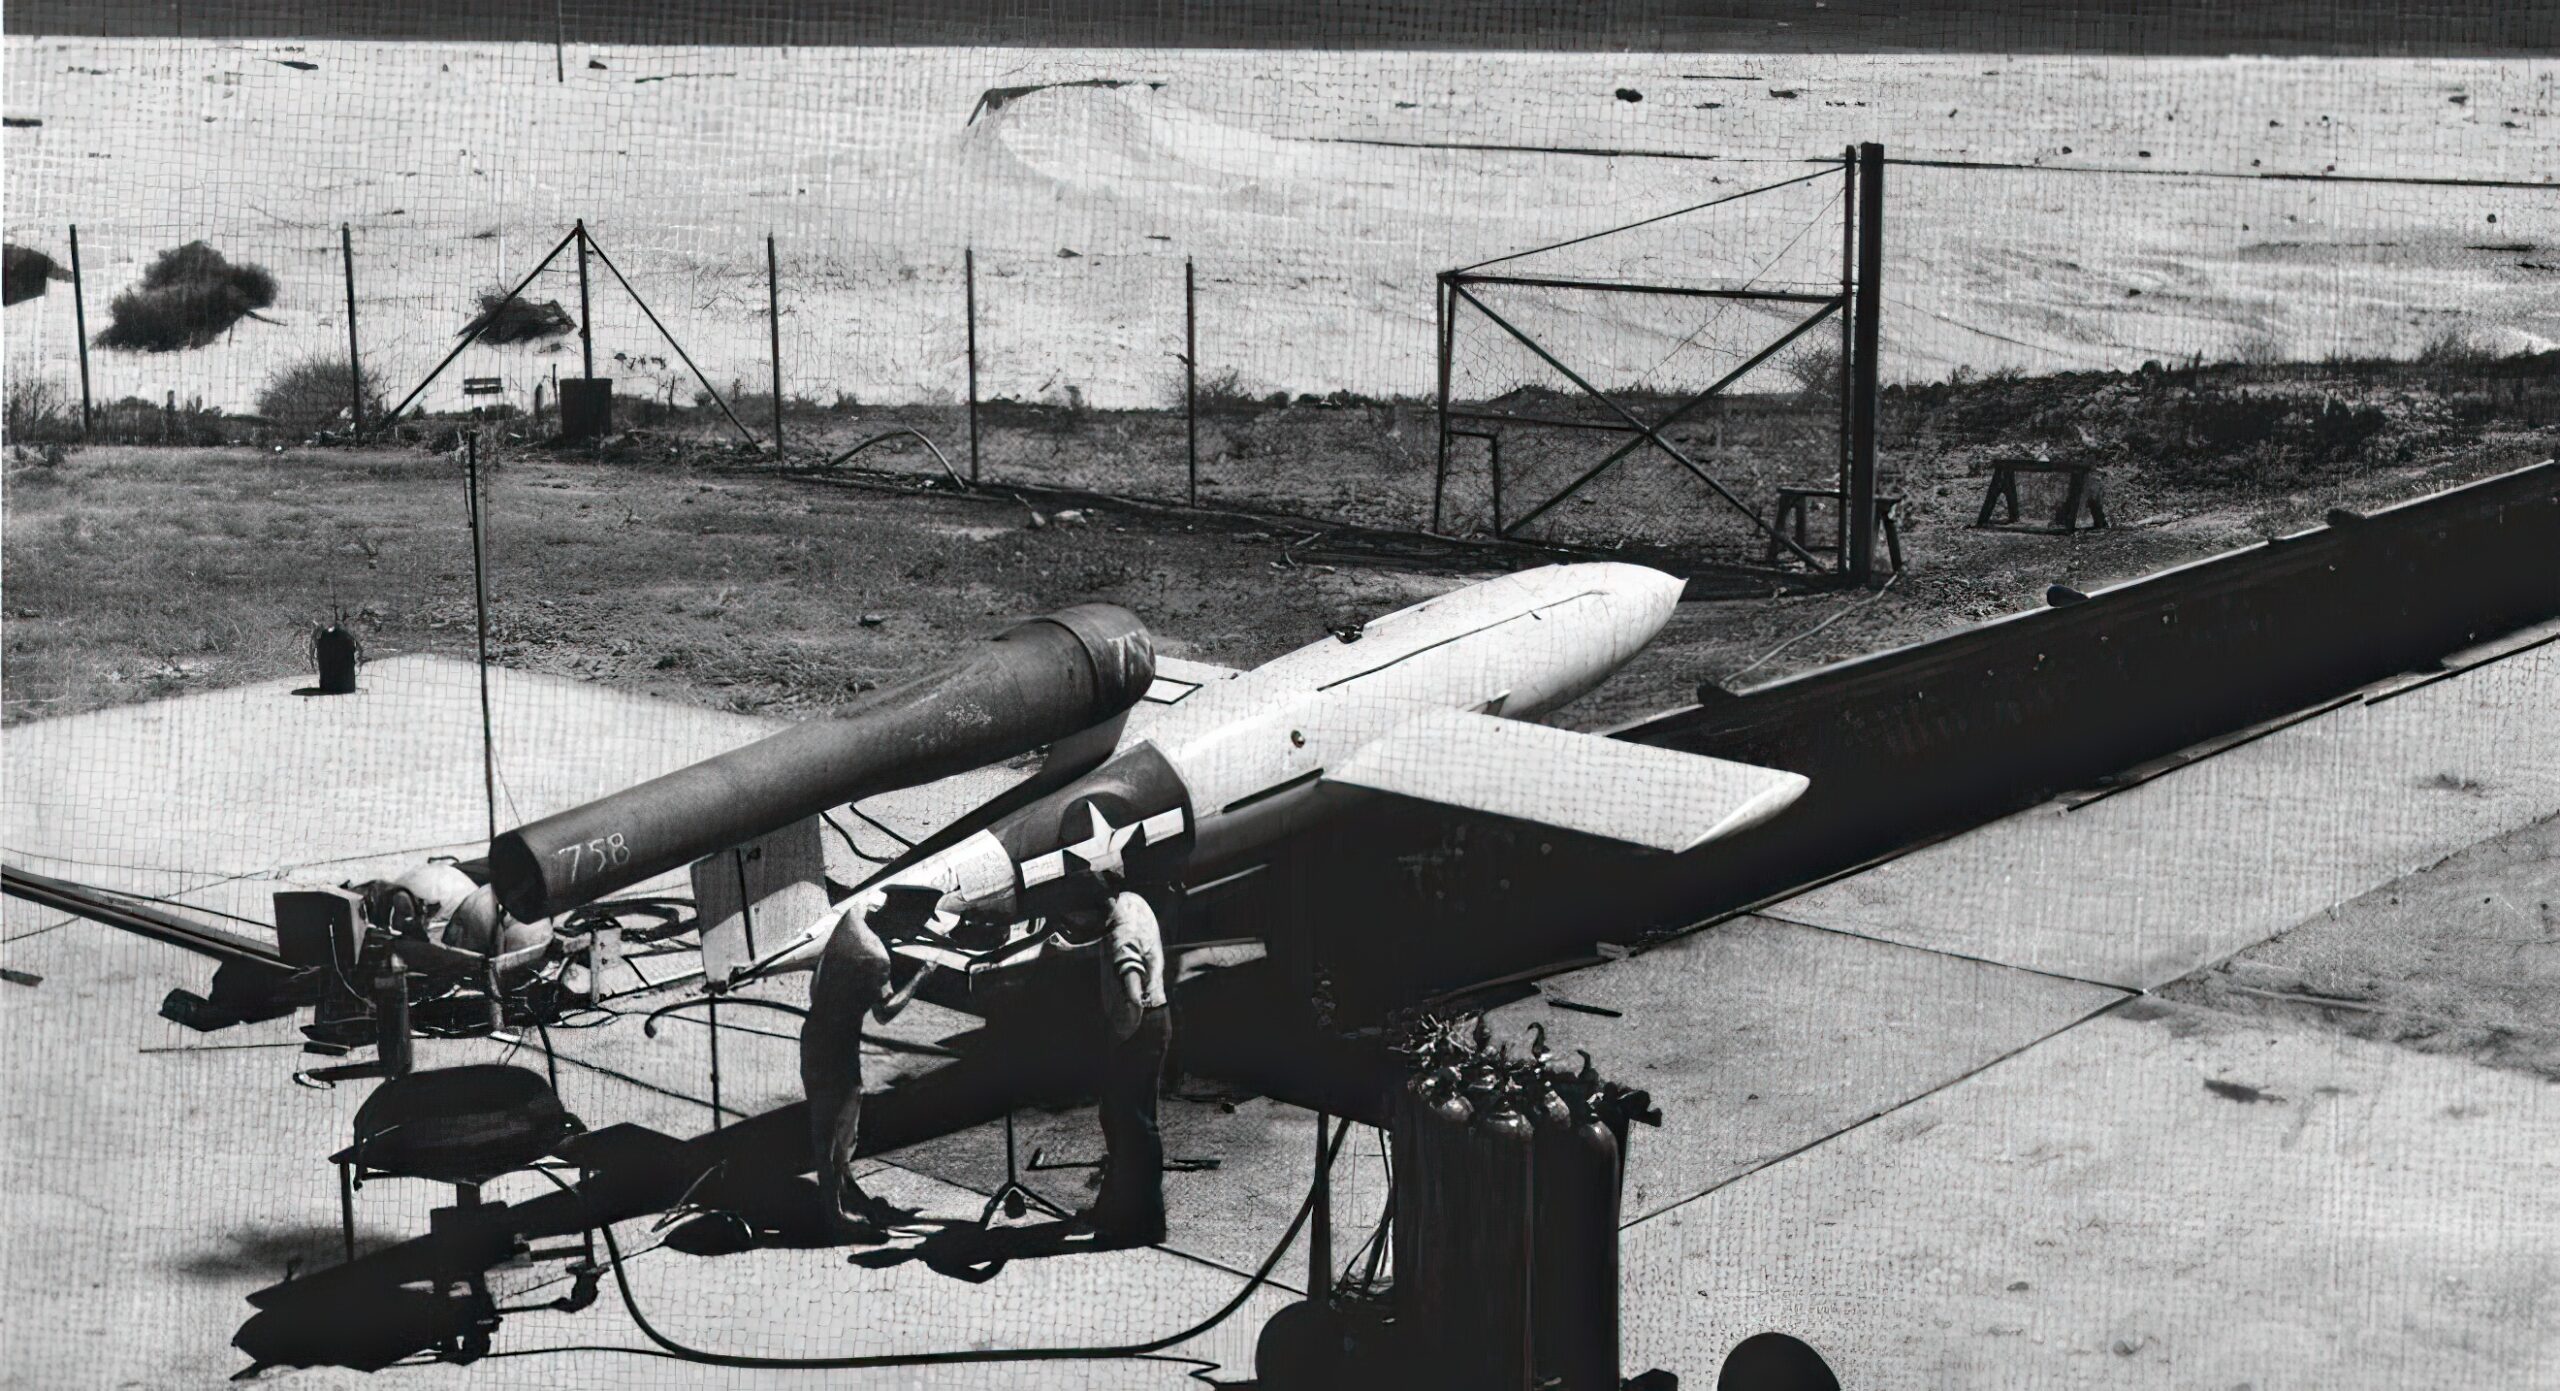 A Republic-Ford JB-2 Loon cruise missile is prepared for launch from the U.S. Navy Pacific Missile Test Center Point Mugu in 1948.